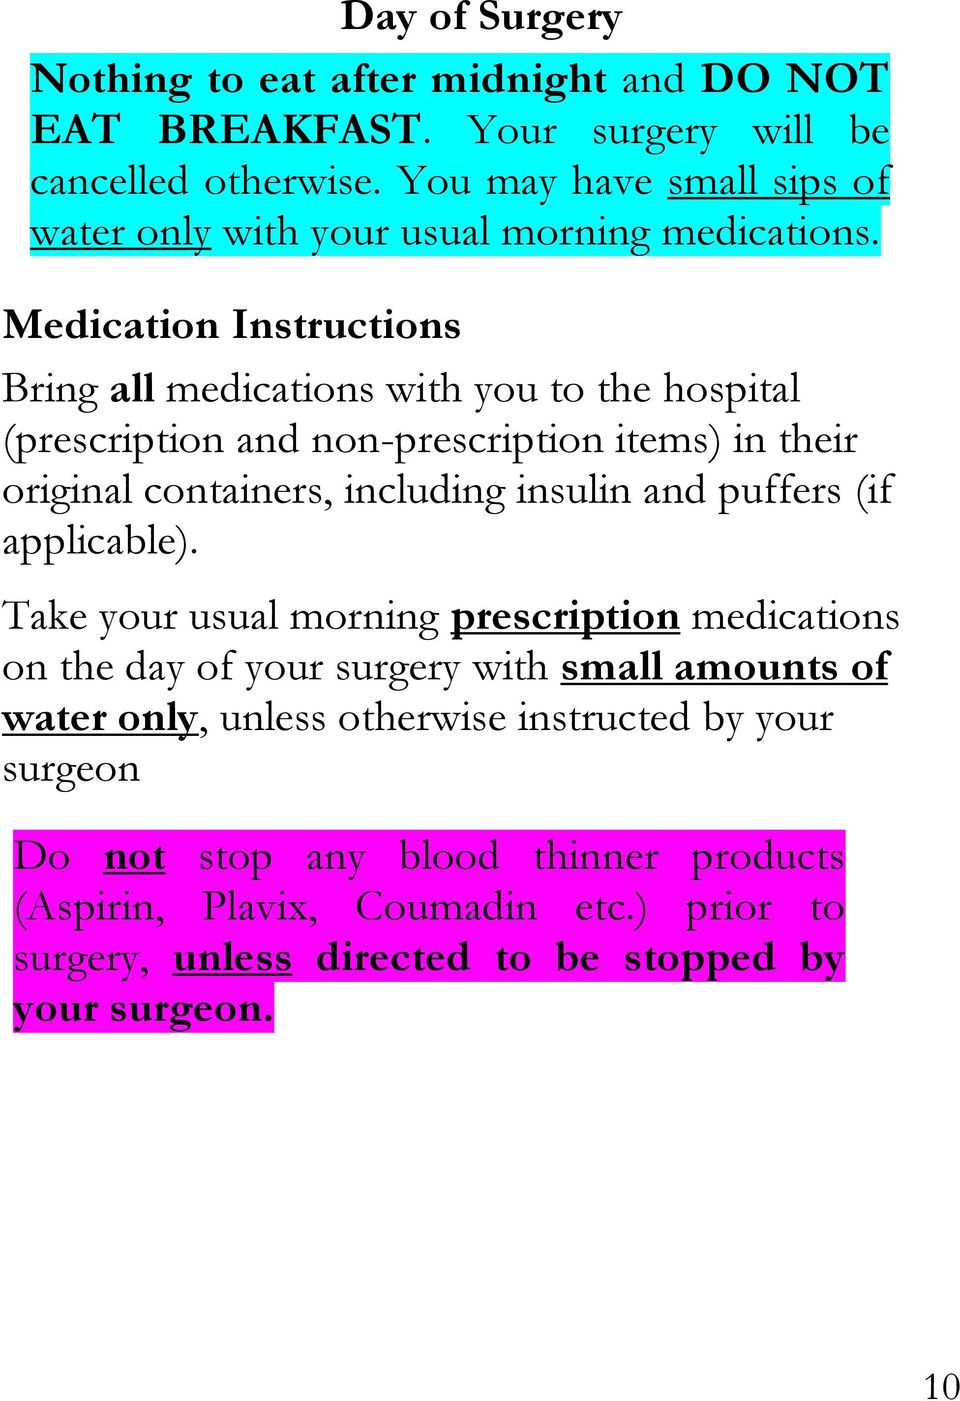 Medication Instructions Bring all medications with you to the hospital (prescription and non-prescription items) in their original containers, including insulin and